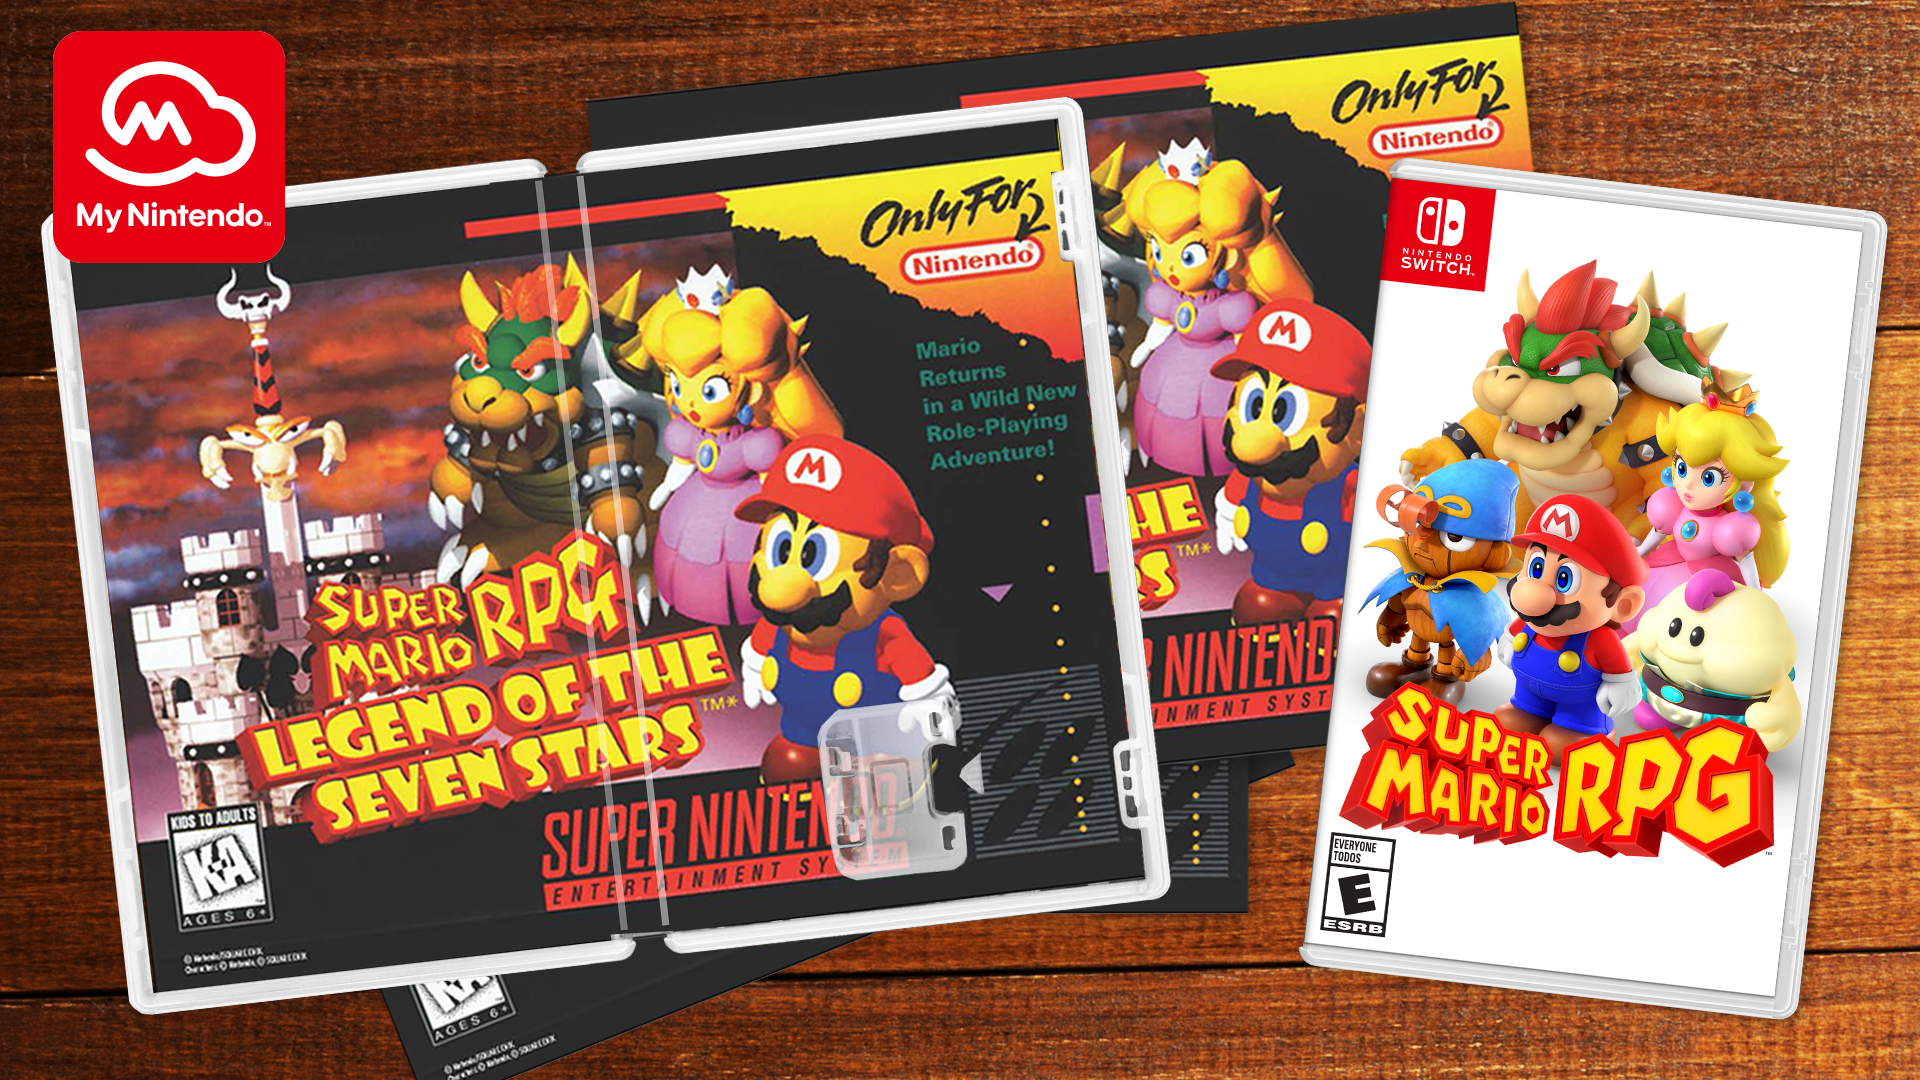 Play classic Mario RPG-style games with Nintendo Switch Online + Expansion  Pack